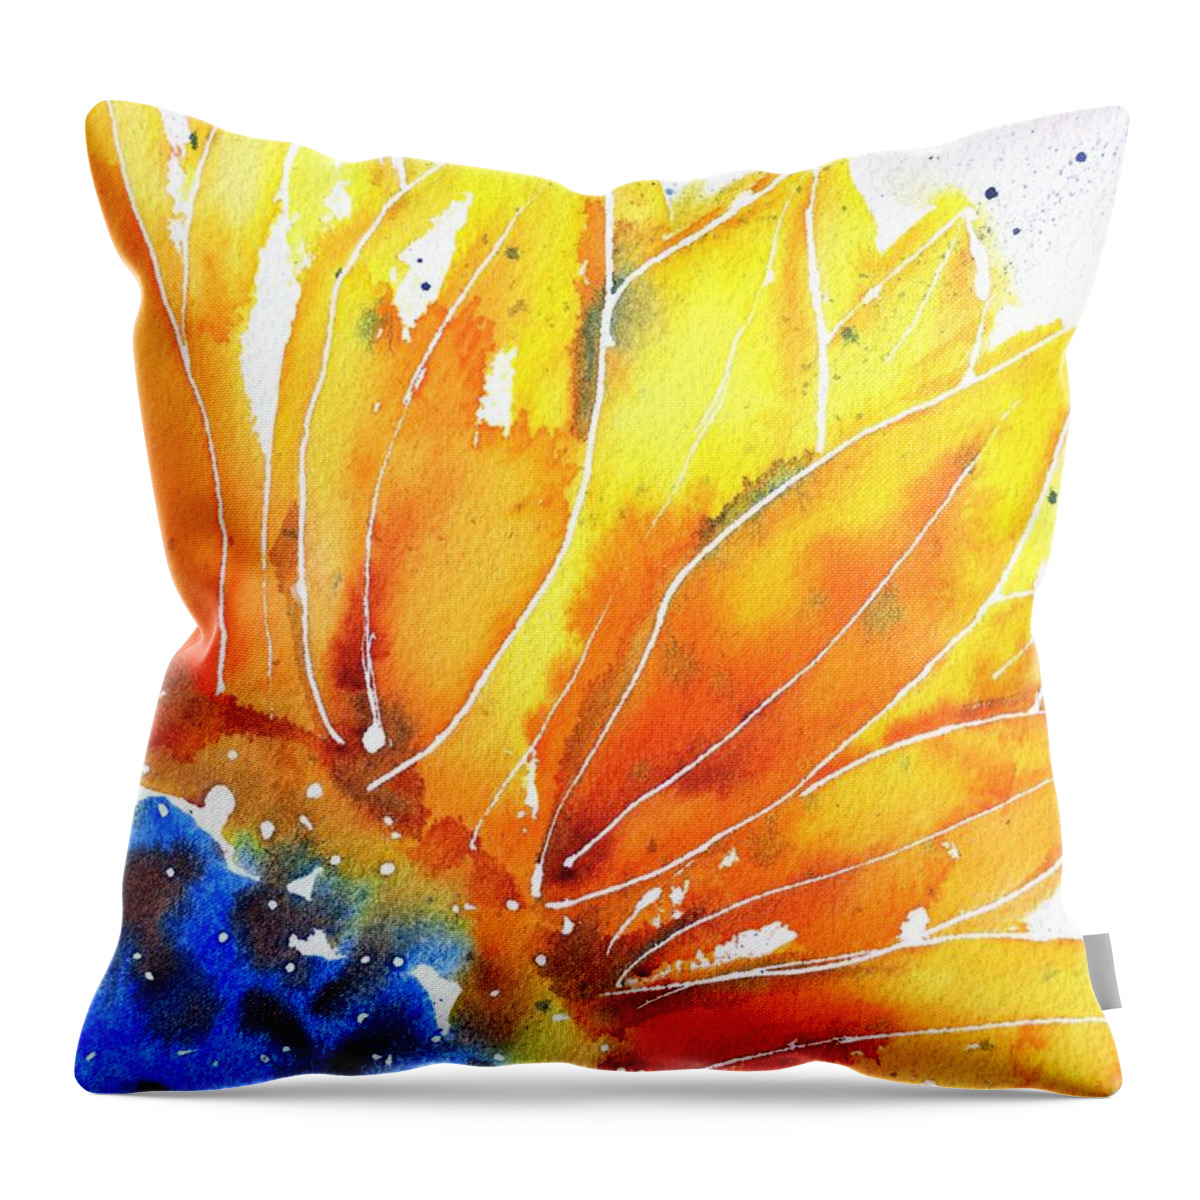 Sunflower Throw Pillow featuring the painting Sunflower Blue Orange and Yellow by Carlin Blahnik CarlinArtWatercolor